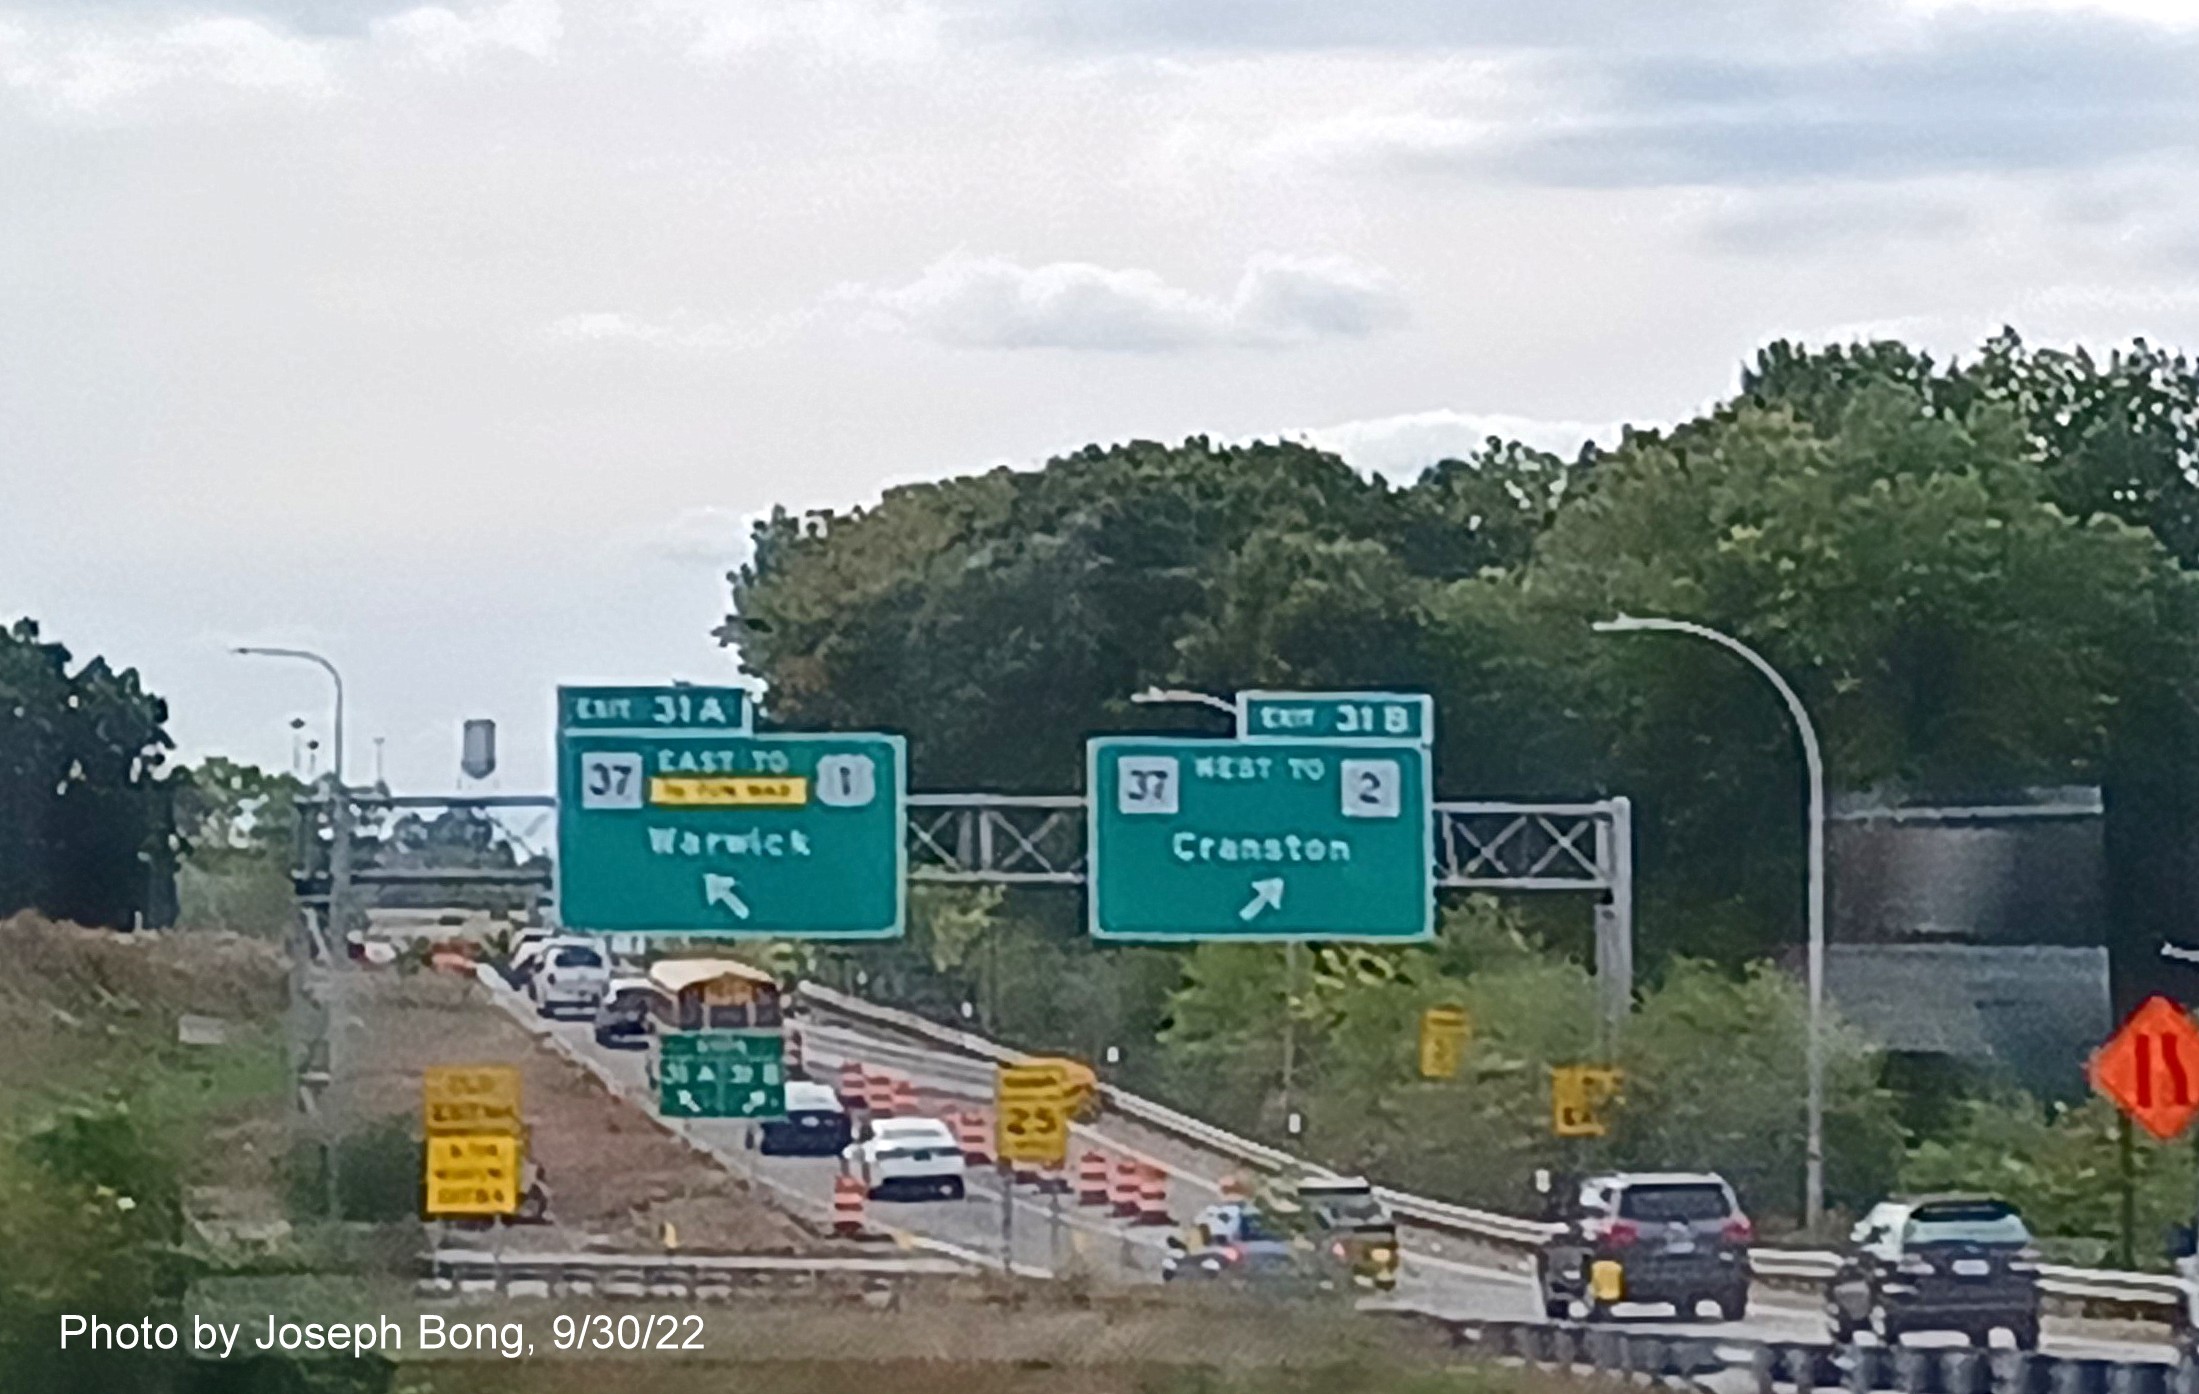 Image of overhead ramp signage from I-95 South in Cranston for RI 37 exits with new milepost based exit numbers and separate yellow Old Exit 15 A/B sign below, photo by Joseph Bong, September 2022